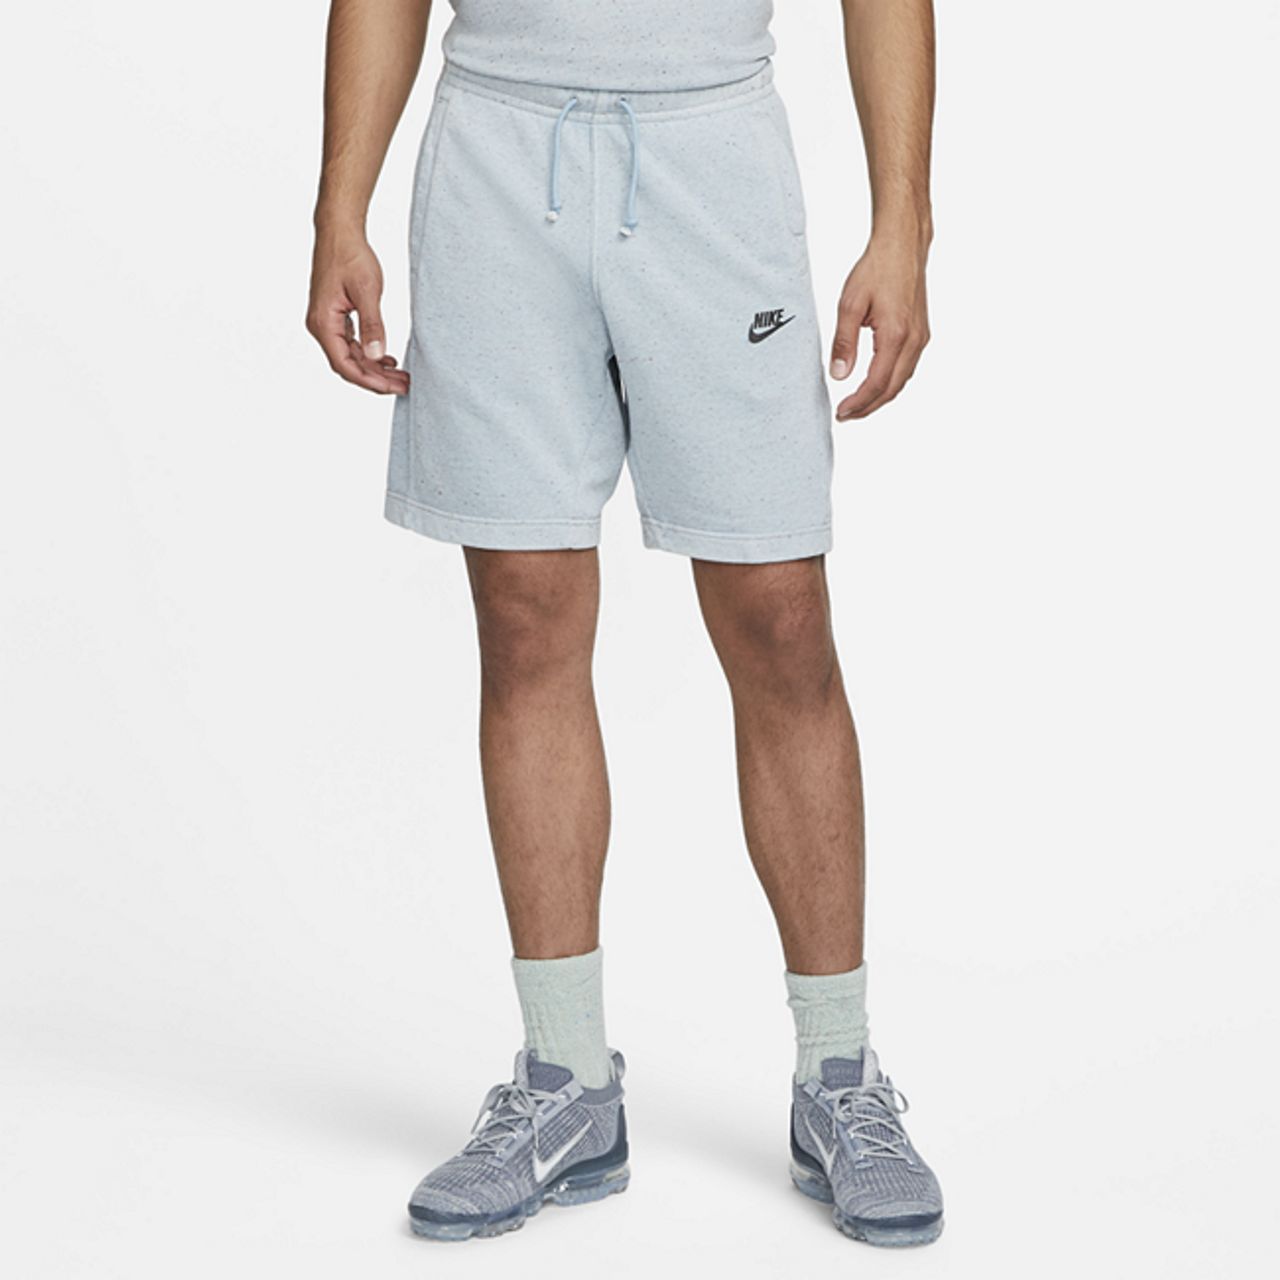 Nike Club Fleece+ Men's Shorts - Blue DQ4667-412 - Compare prices